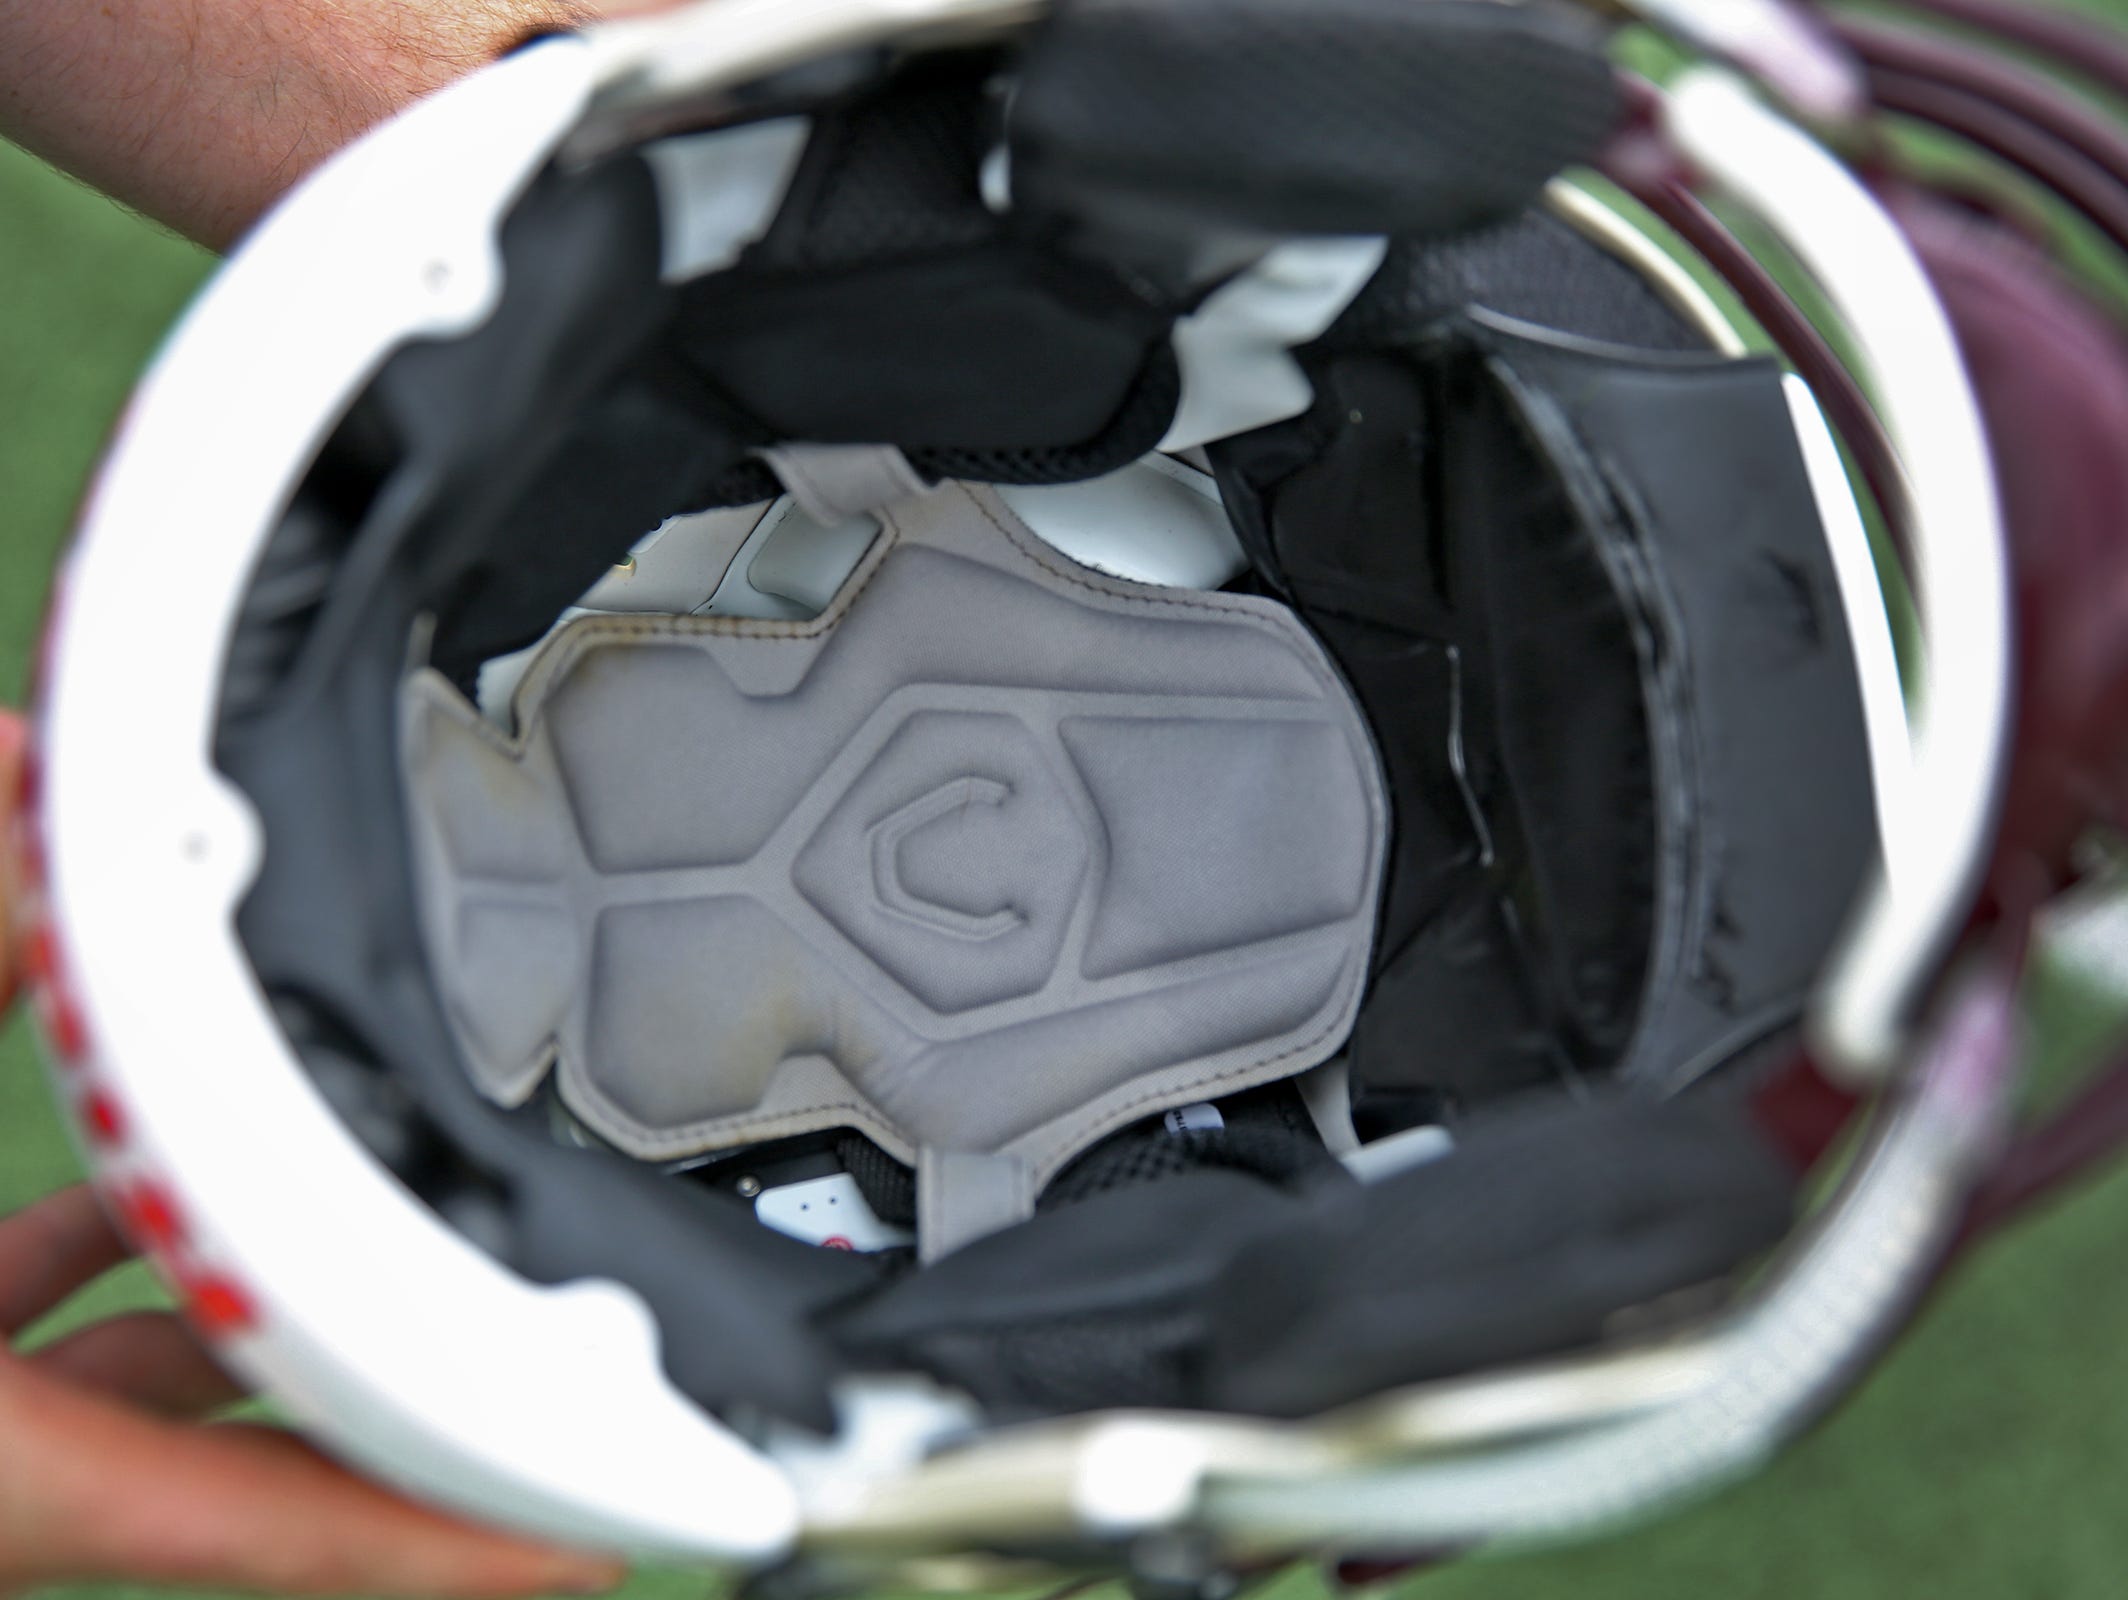 Under padding inside Brebeuf's helmets are sensors and a power source. If a player gets hit at a critical level, it will send an alert to the monitoring athletic trainer so that concussion protocol can be initiated.